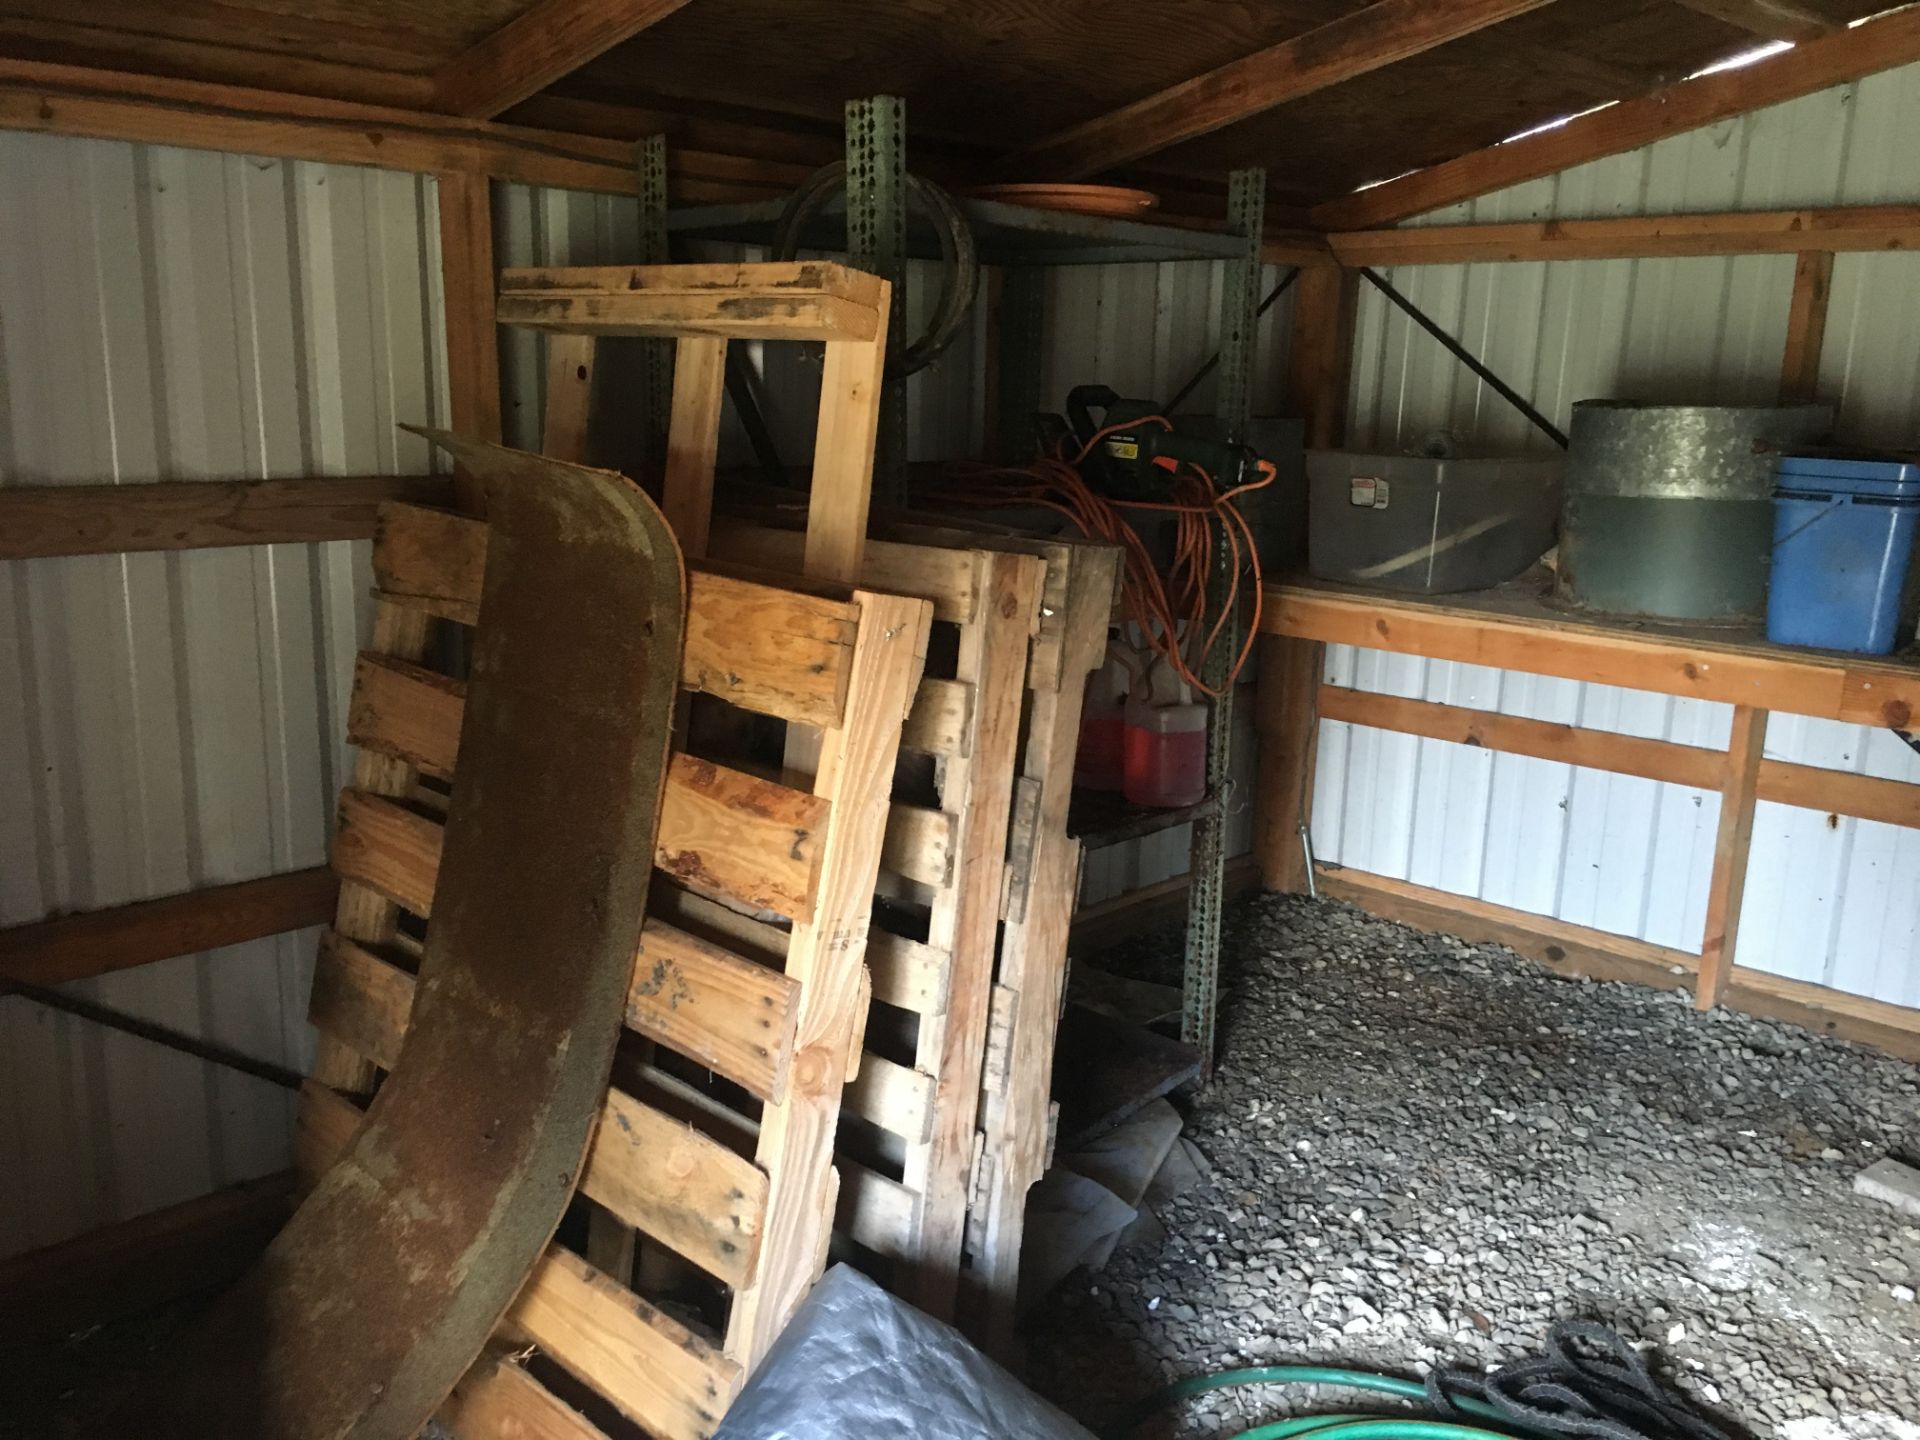 Contents inside shed including 2 gas cans, bug lamp, electric trimmer, screens, pallets etc. - Image 2 of 3